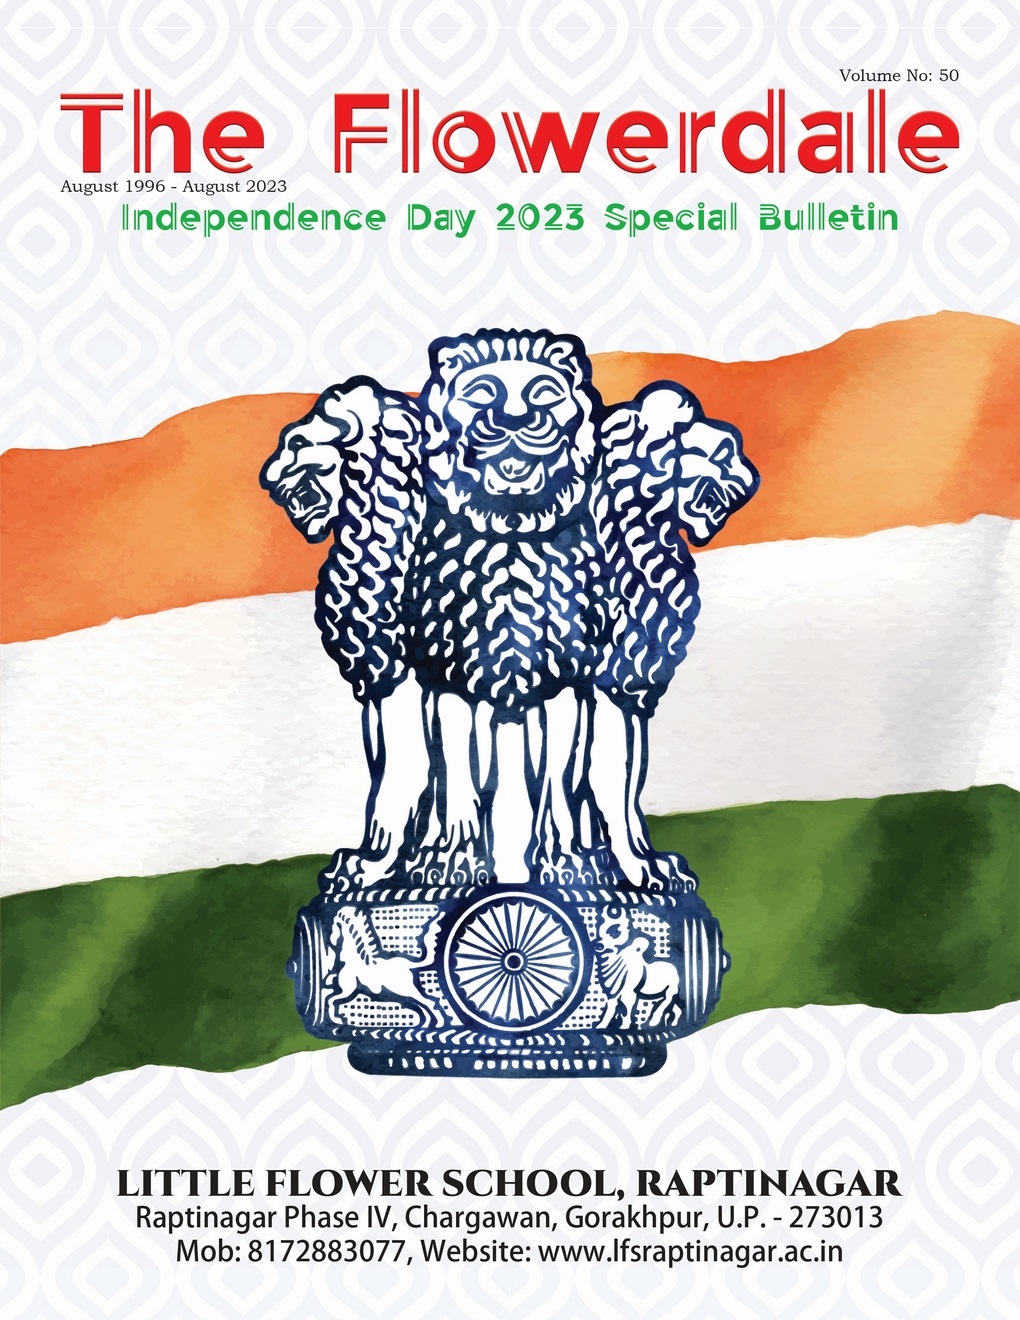 Independence Day 2023 Special Bulletin